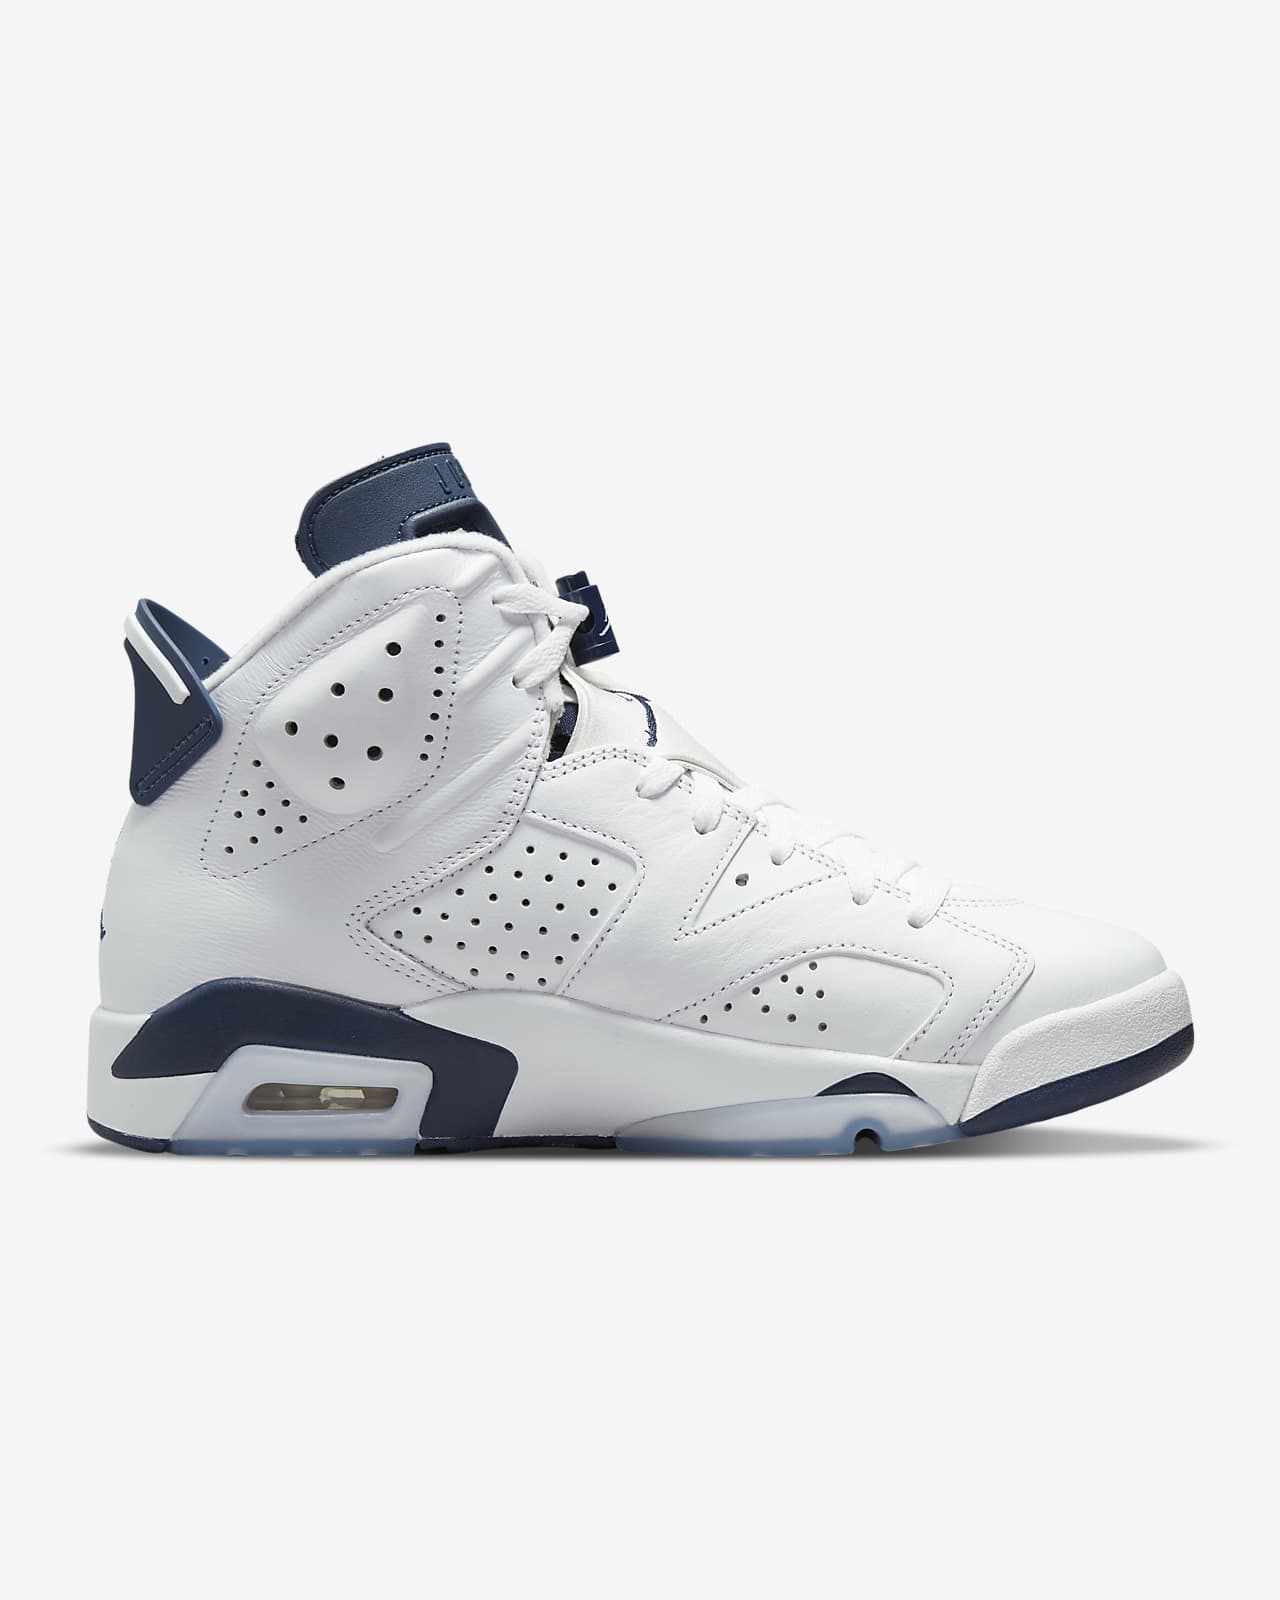 Of storm Mouthwash suddenly Air Jordan 6 Retro Shoes. Nike IN